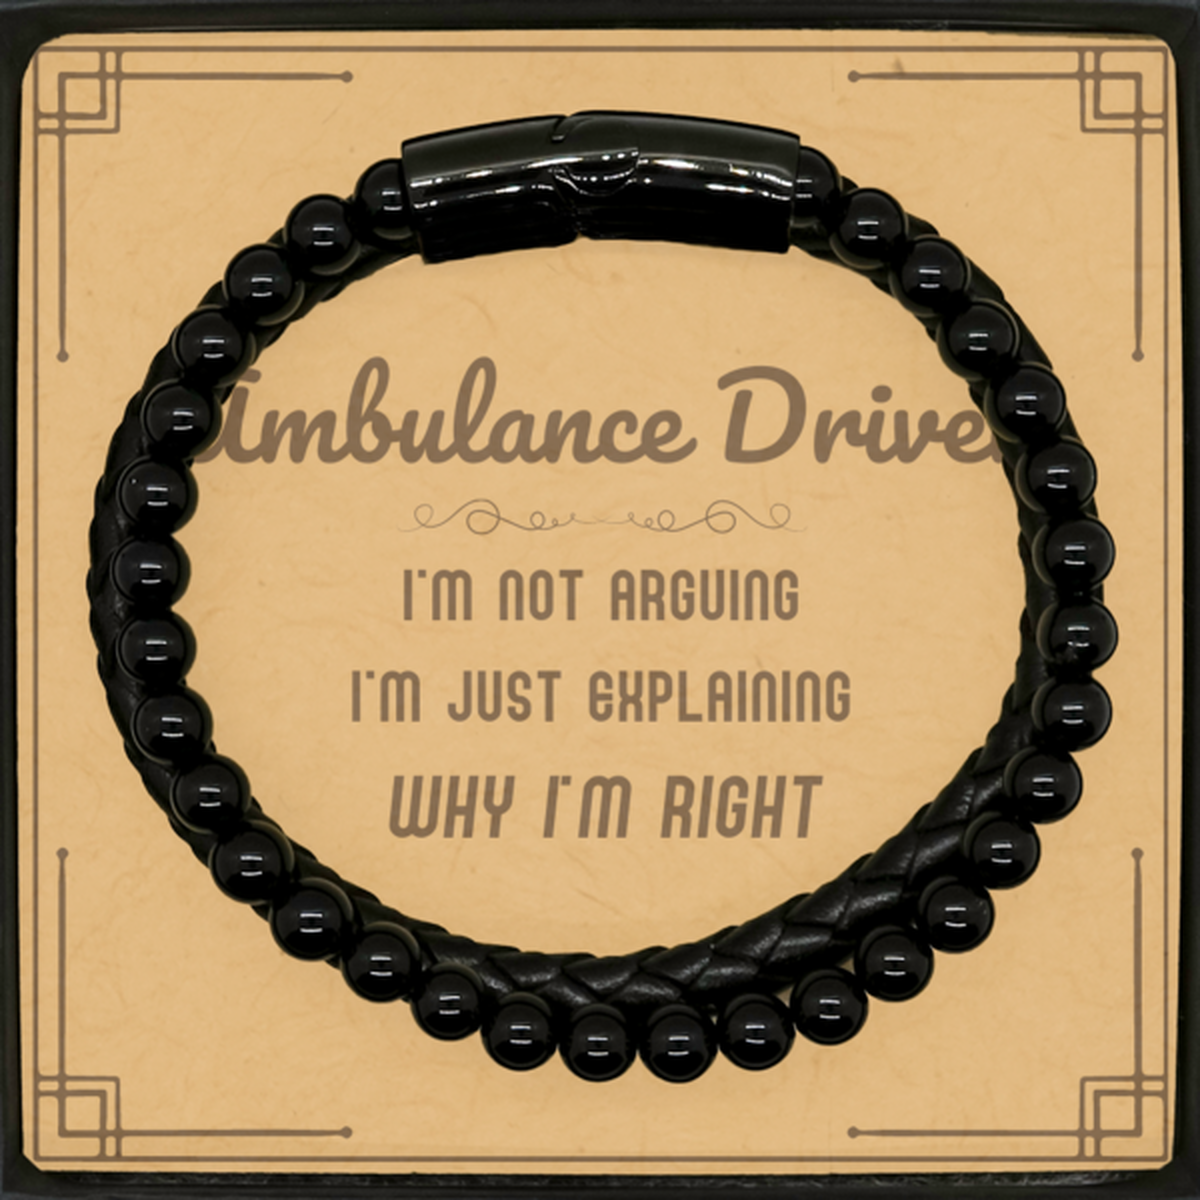 Ambulance Driver I'm not Arguing. I'm Just Explaining Why I'm RIGHT Stone Leather Bracelets, Funny Saying Quote Ambulance Driver Gifts For Ambulance Driver Message Card Graduation Birthday Christmas Gifts for Men Women Coworker